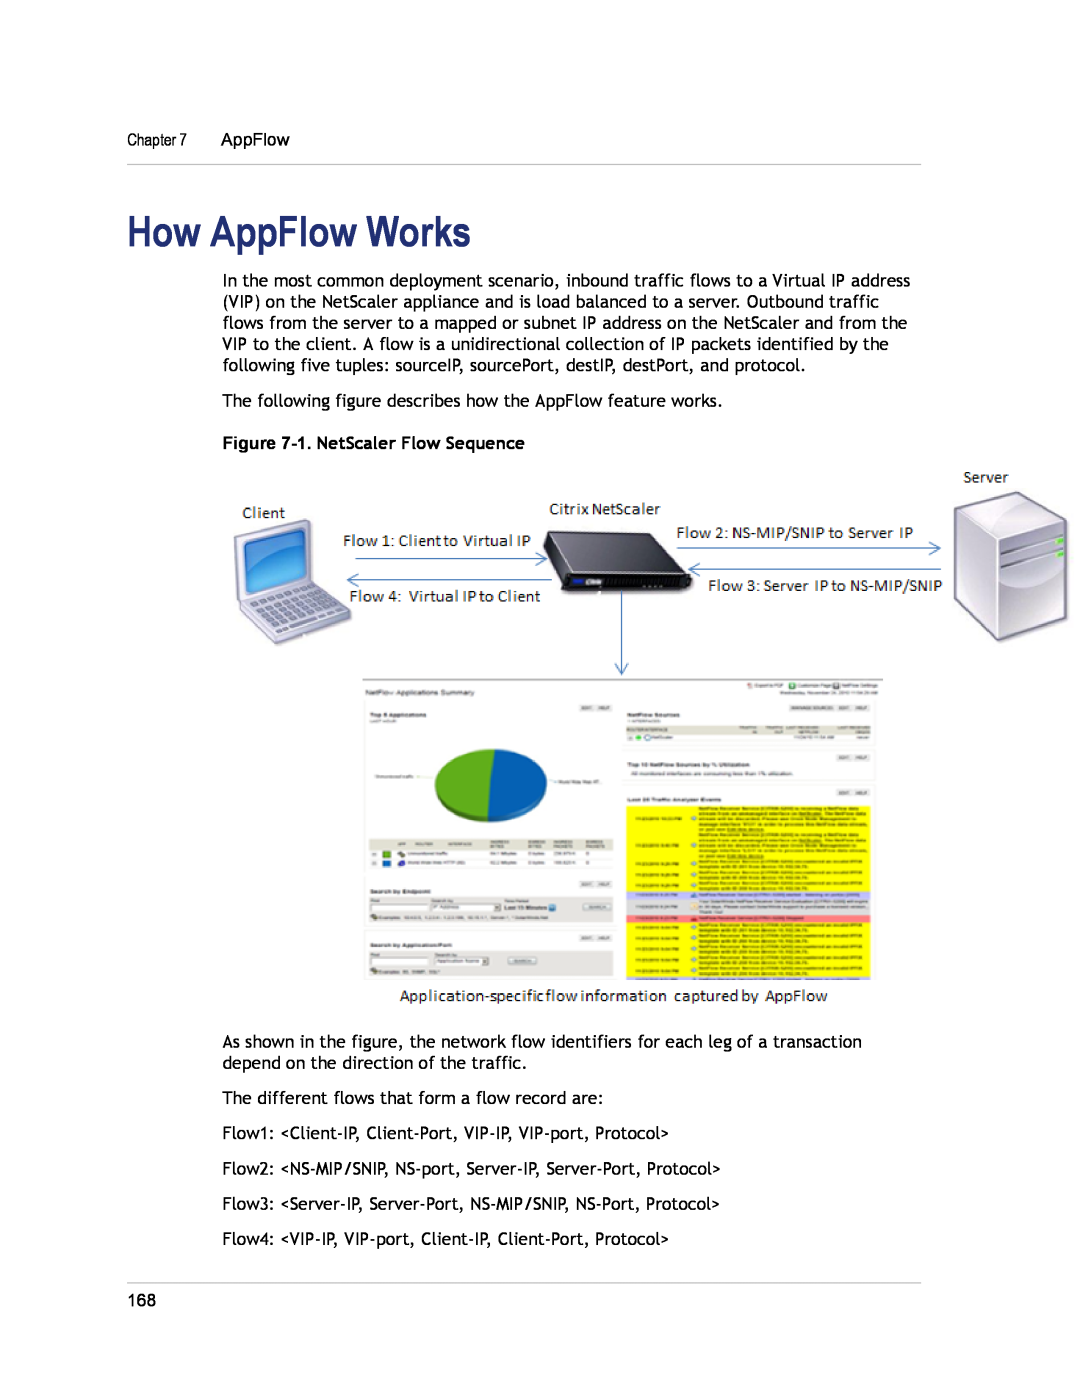 Citrix Systems CITRIX NETSCALER 9.3 manual How AppFlow Works, 1. NetScaler Flow Sequence 